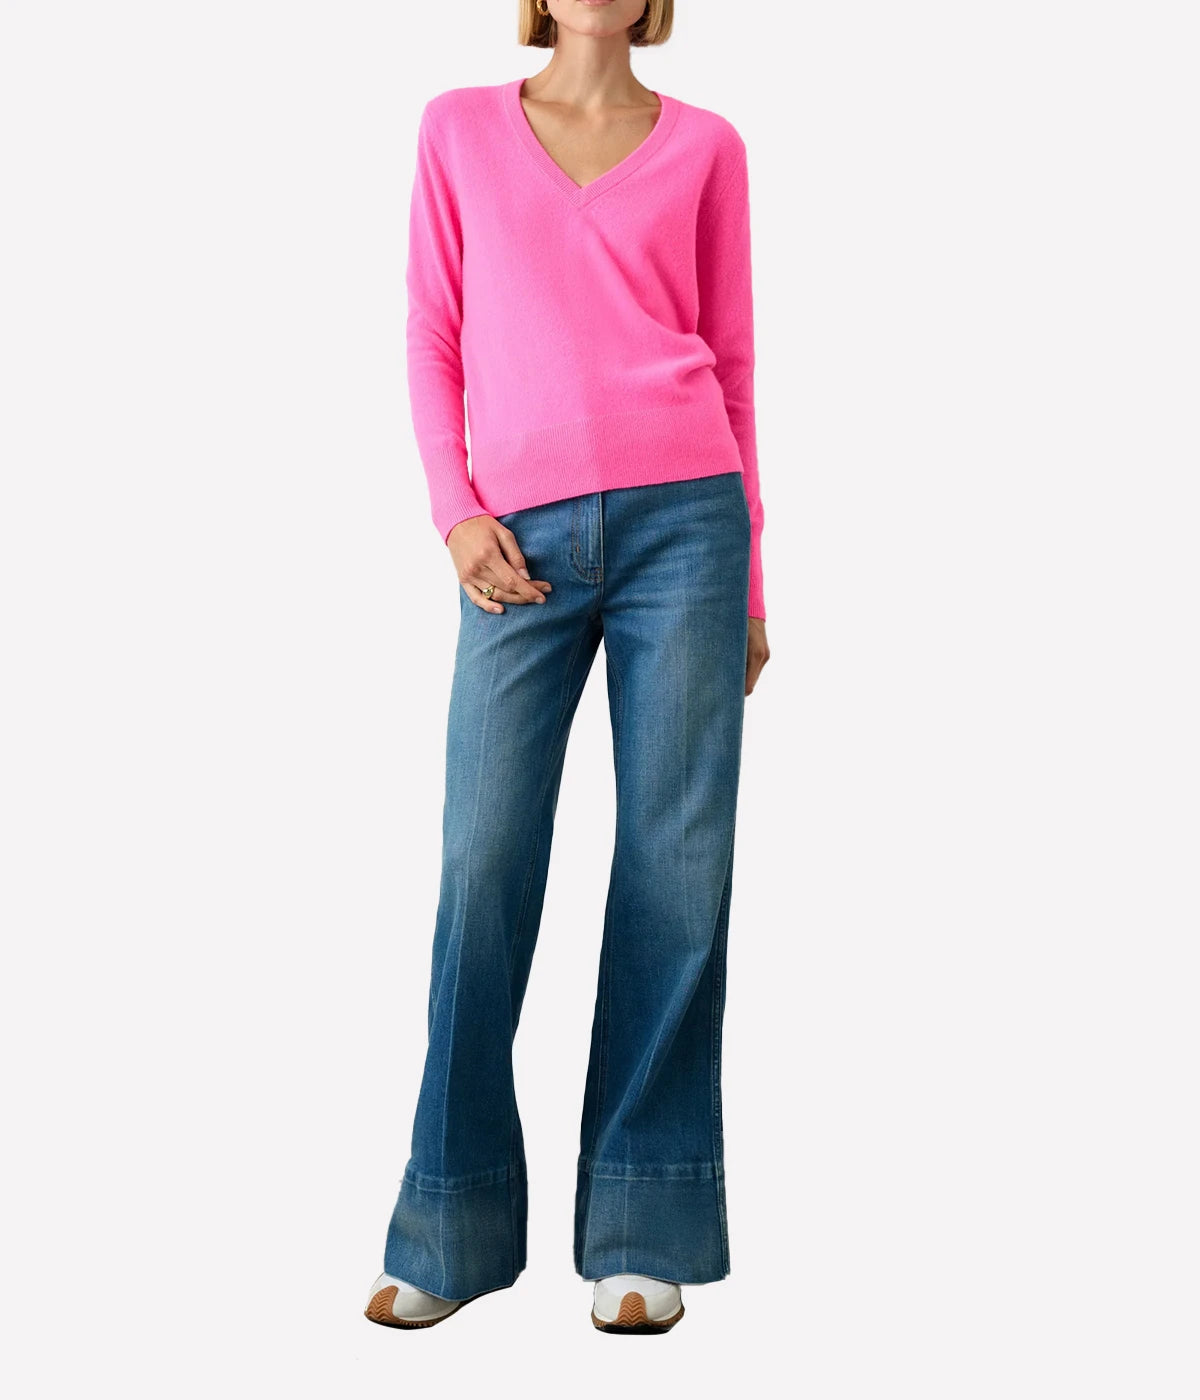 Essential Cashmere V Neck in Pink Glow